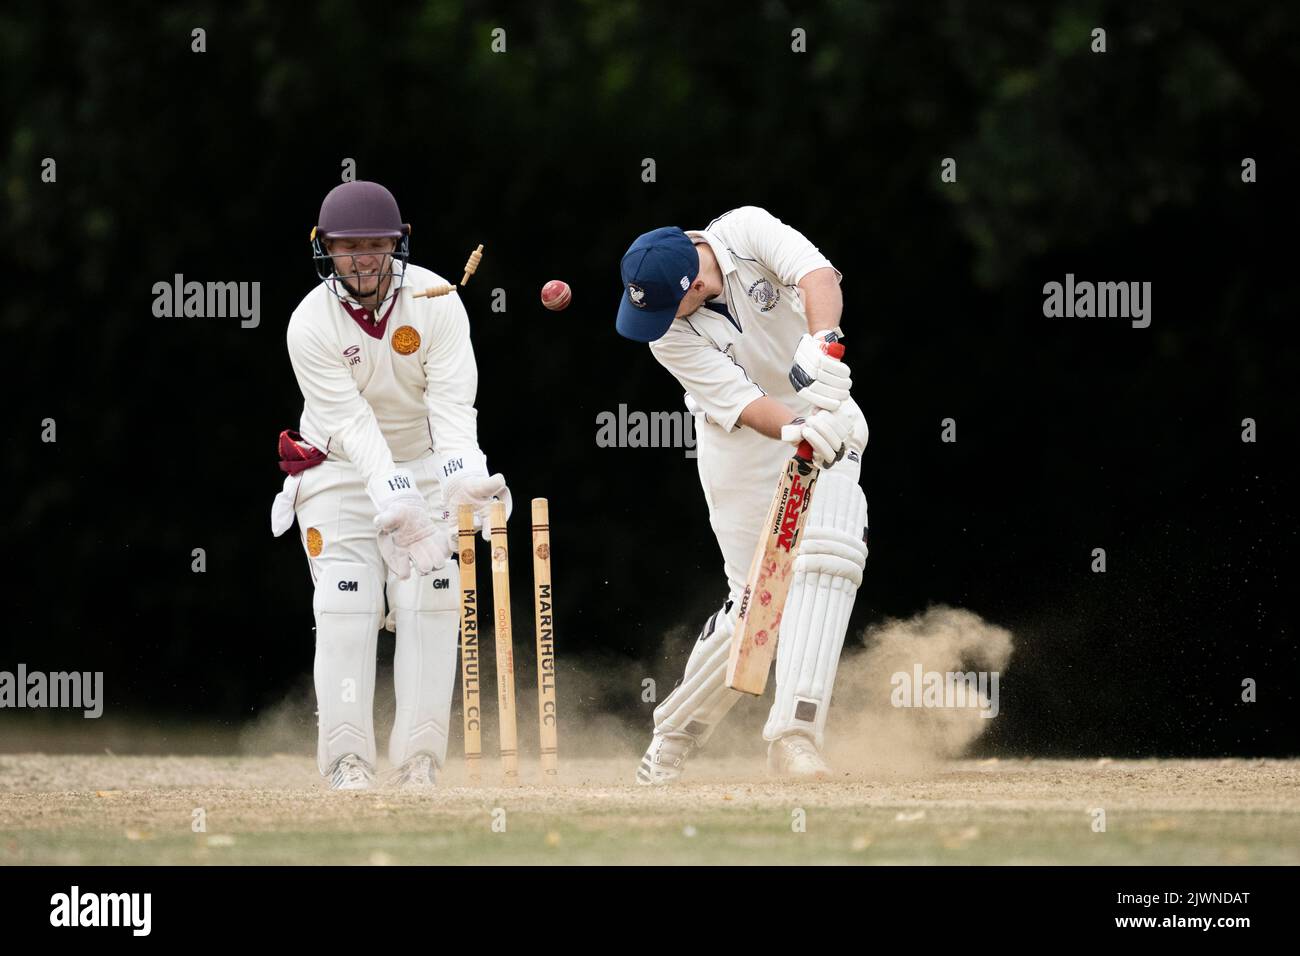 Batsman being bowled out Stock Photo